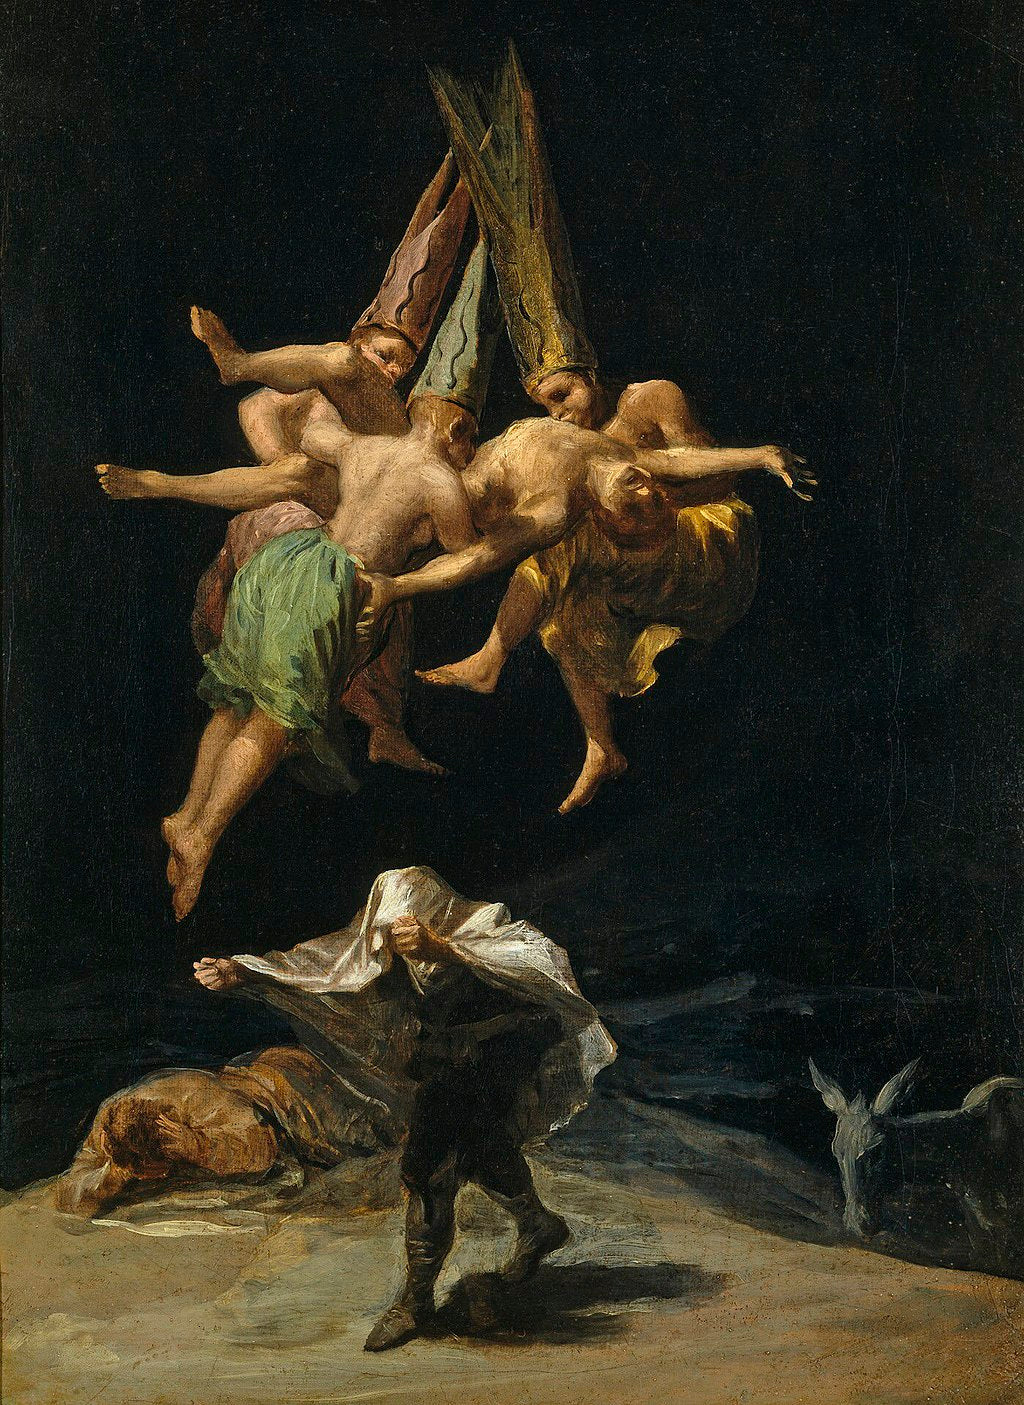 Witches' Flight by Francisco Goya, Reproduction for Sale